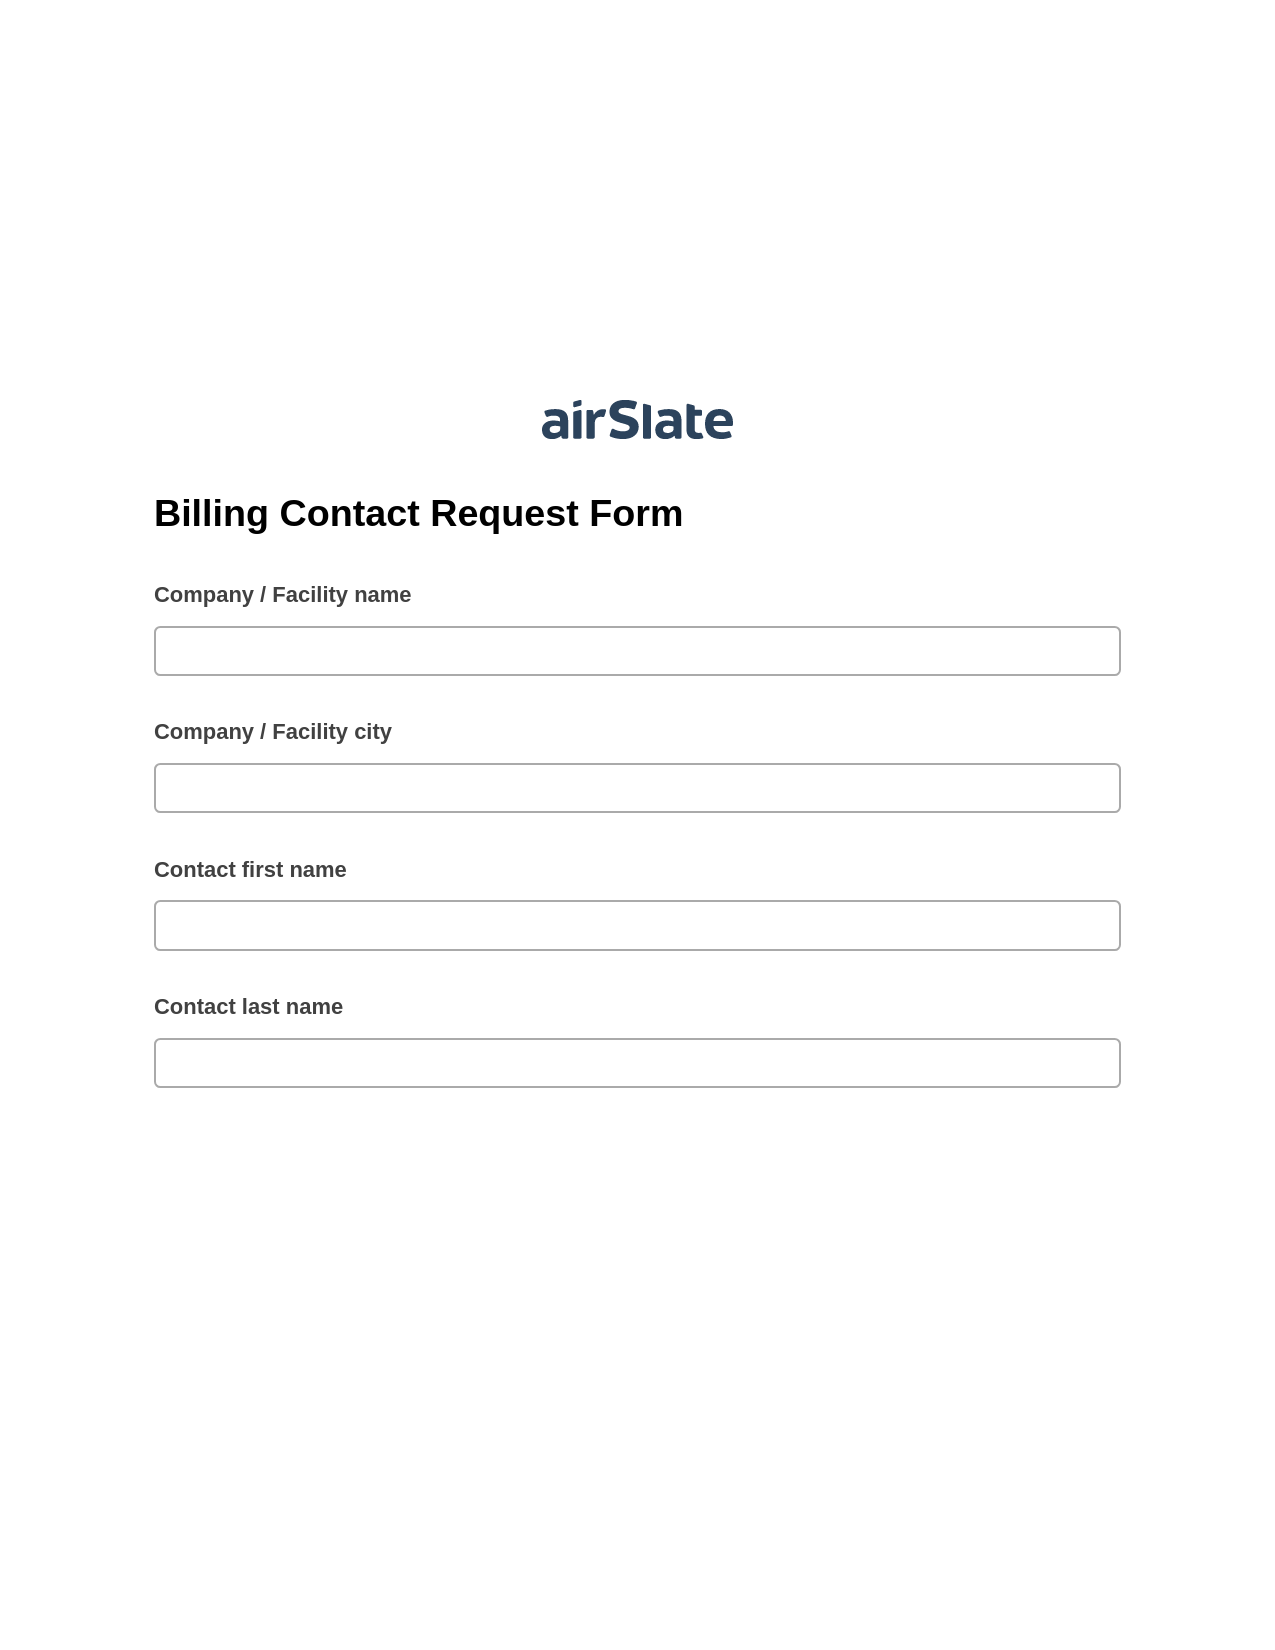 Multirole Billing Contact Request Form Pre-fill Dropdowns from Google Sheet Bot, Reminder Bot, OneDrive Bot